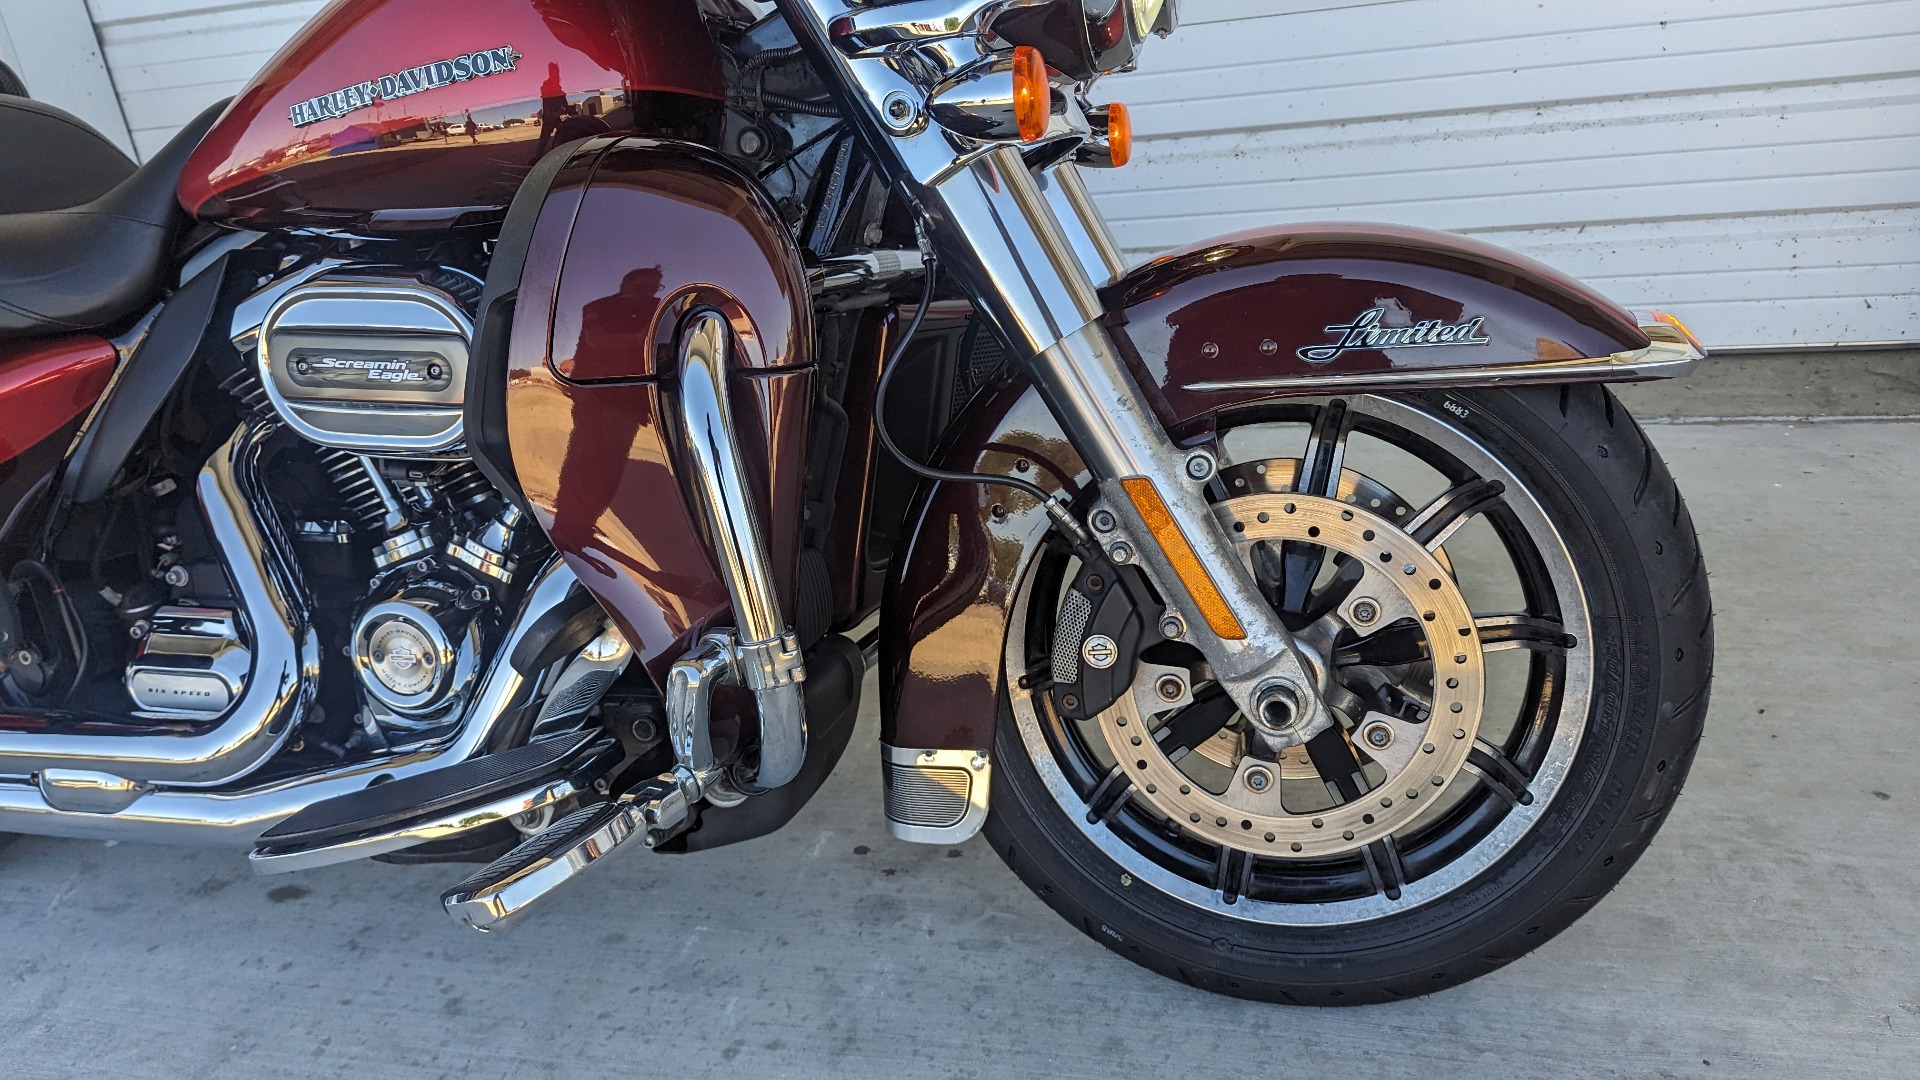 2018 harley davidson ultra limited for sale in dallas - Photo 3